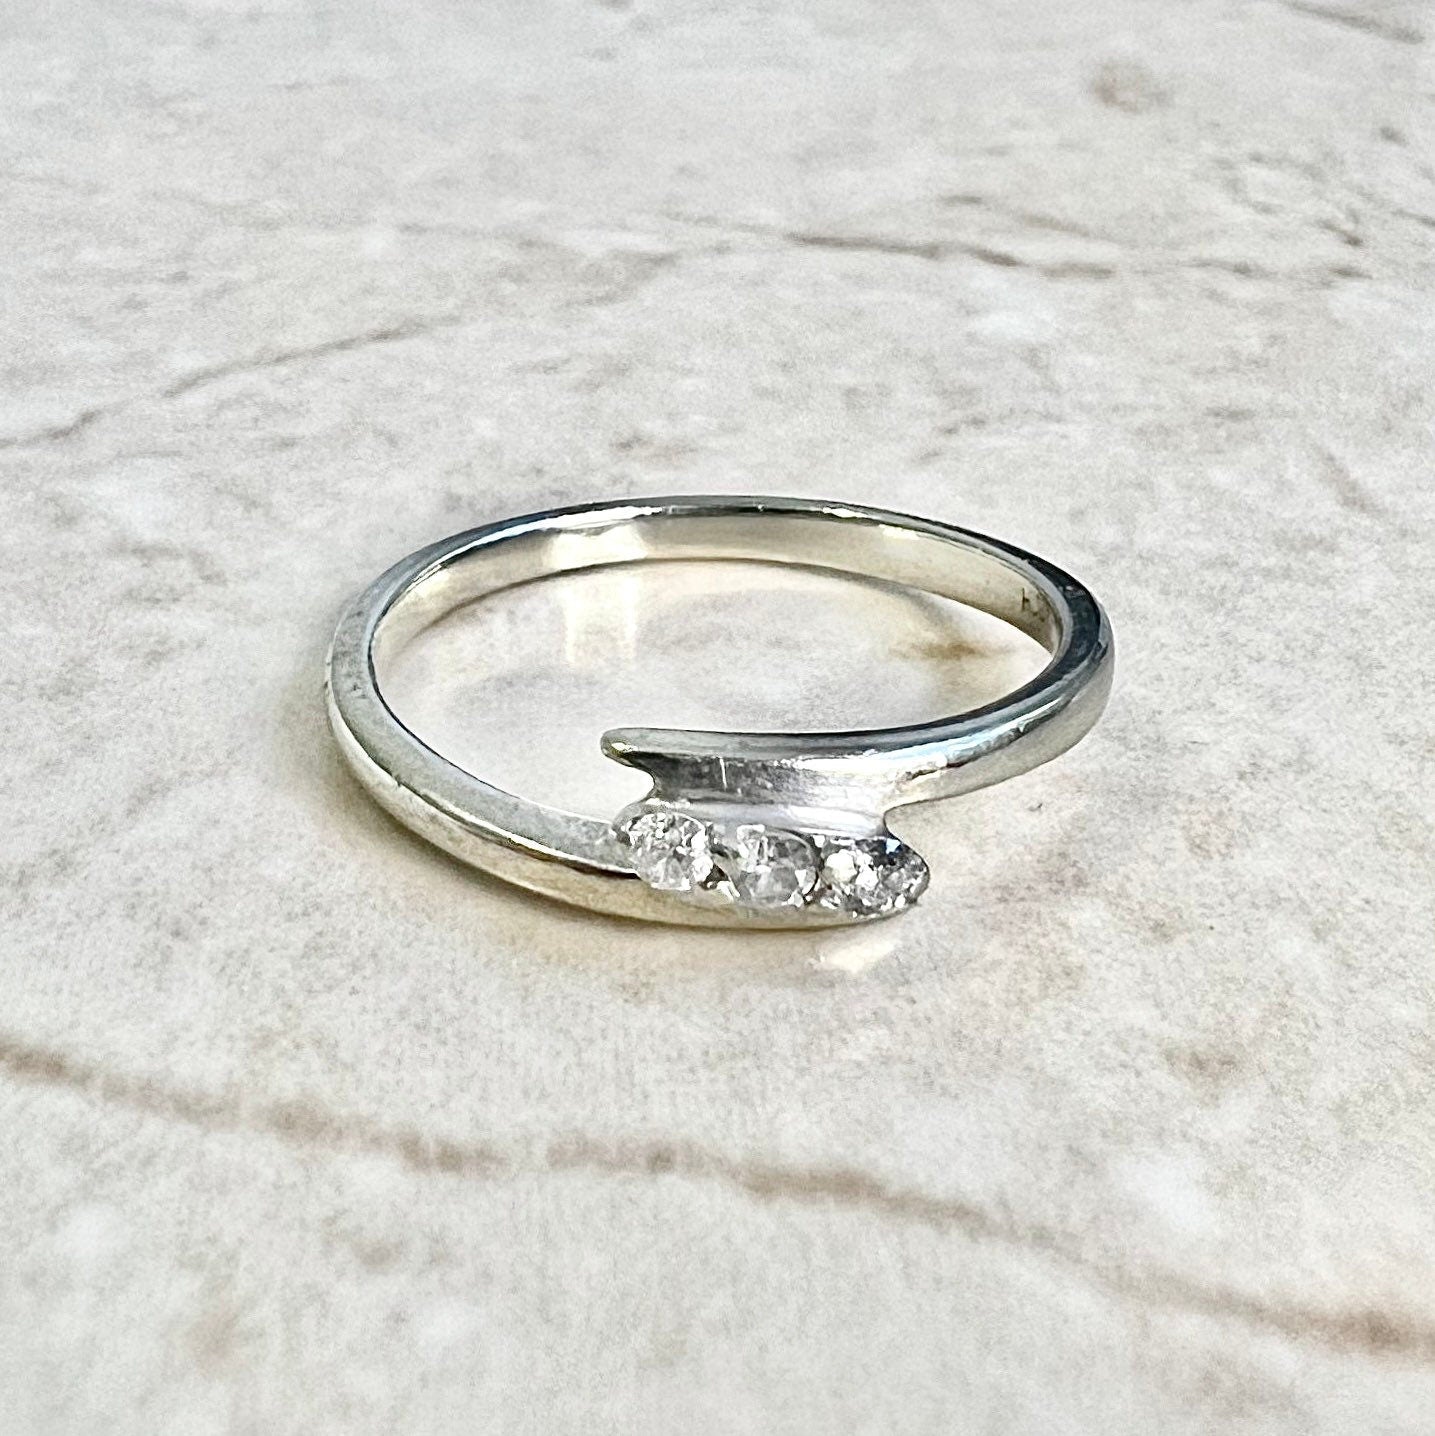 14K 3 Stone Diamond Ring - White Gold Three Stone Ring - Wedding Ring - Anniversary Ring - Promise Ring - Birthday Gift - Best Gifts For Her